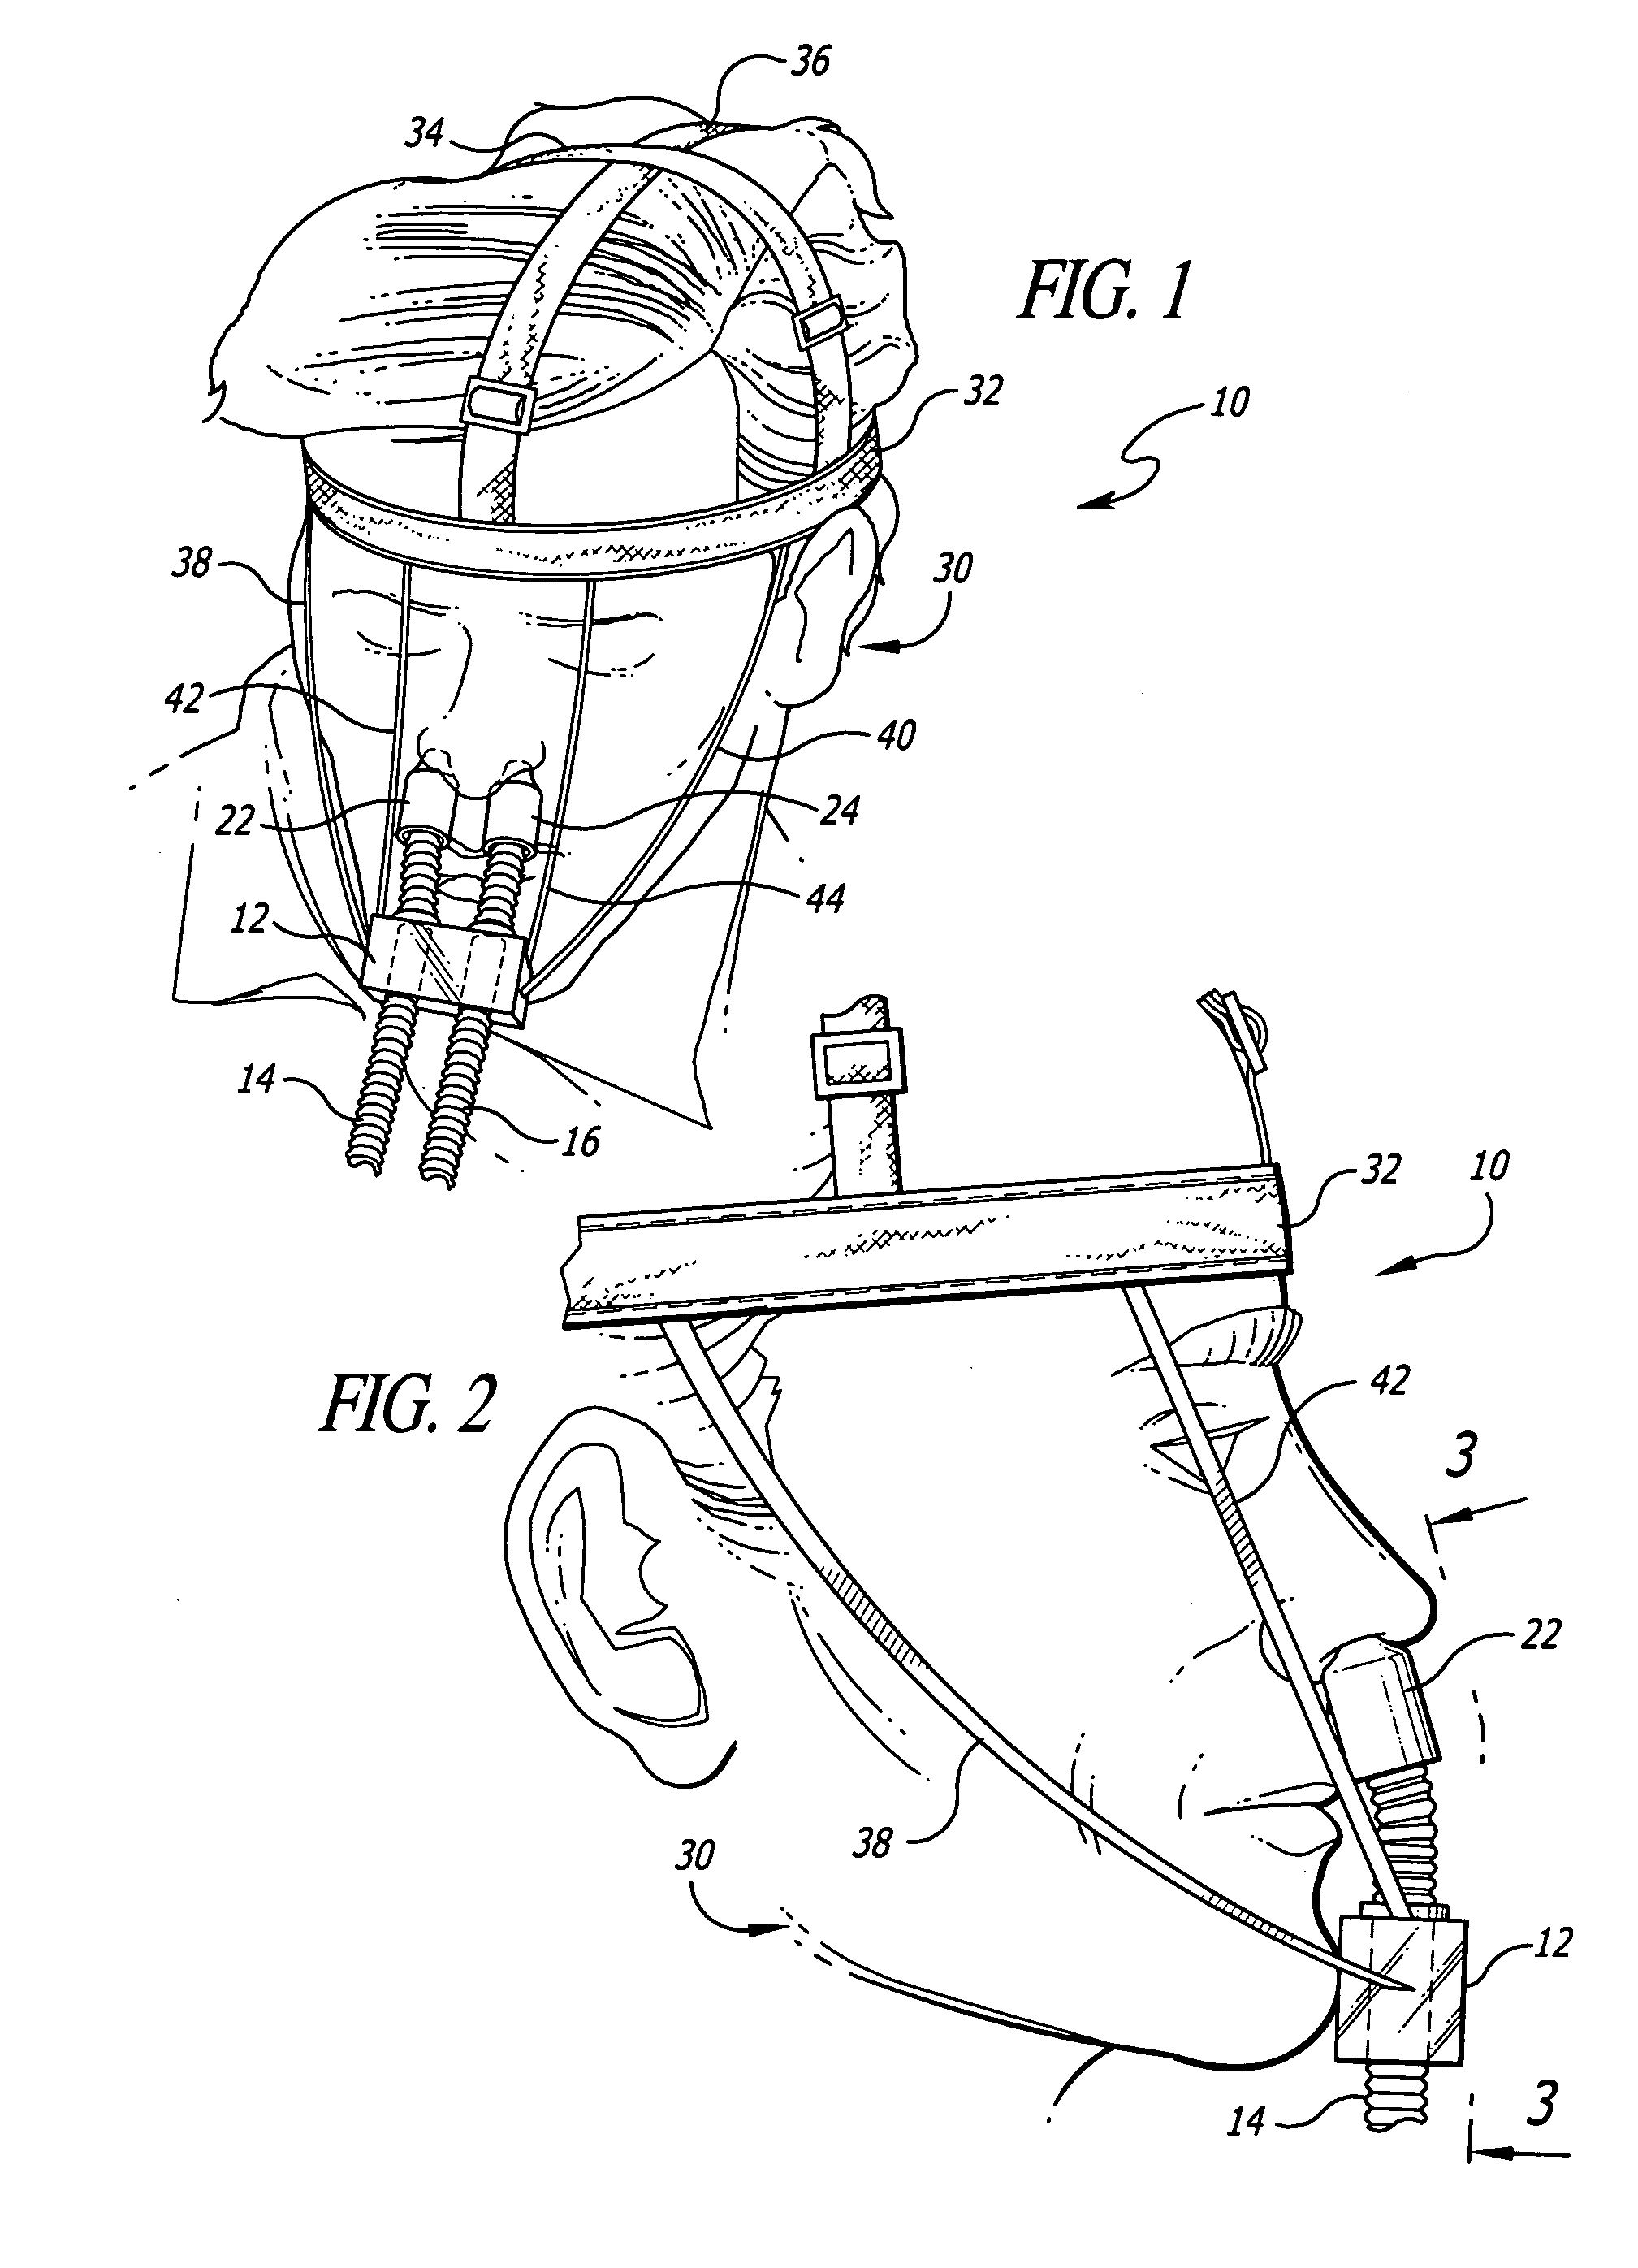 Adjustable support system for nasal breathing devices